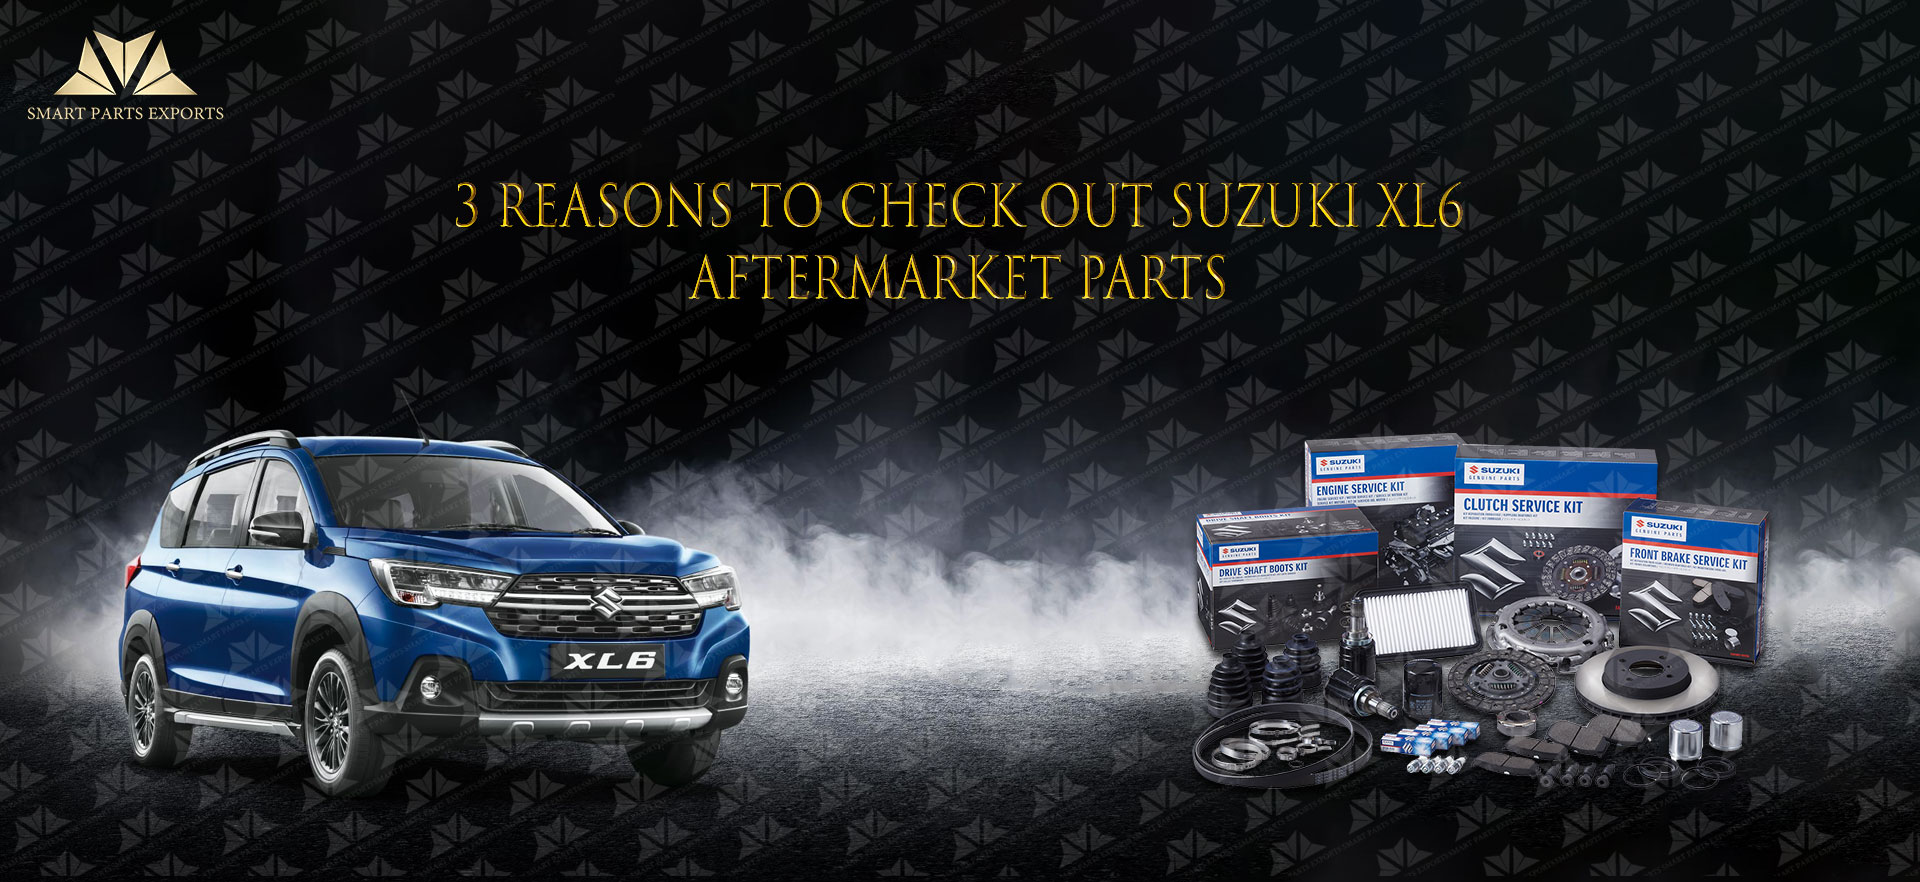 3 Reasons to Check Out Suzuki Xl6 Aftermarket Parts